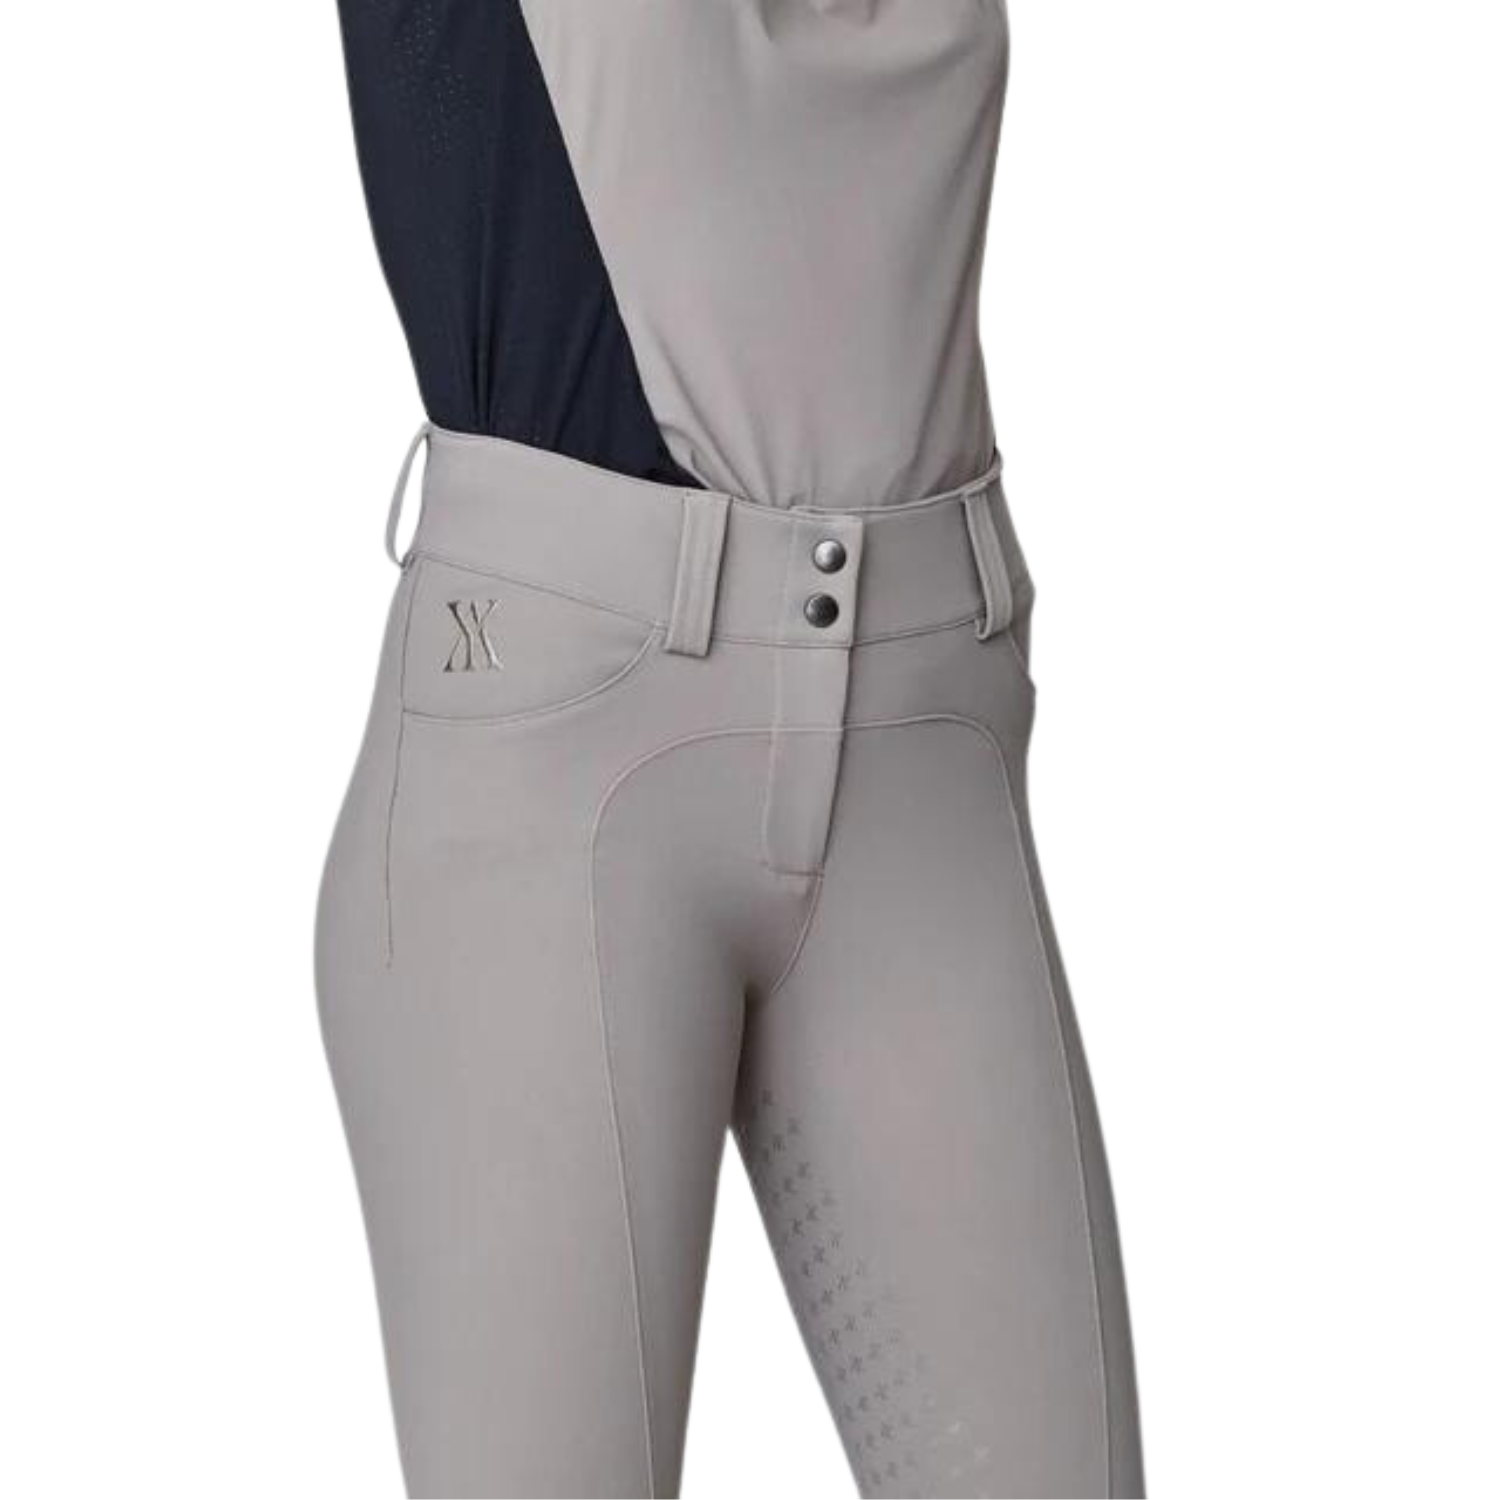 Ladies Compression High Rise Performance Knee Grip Breeches - Taupe